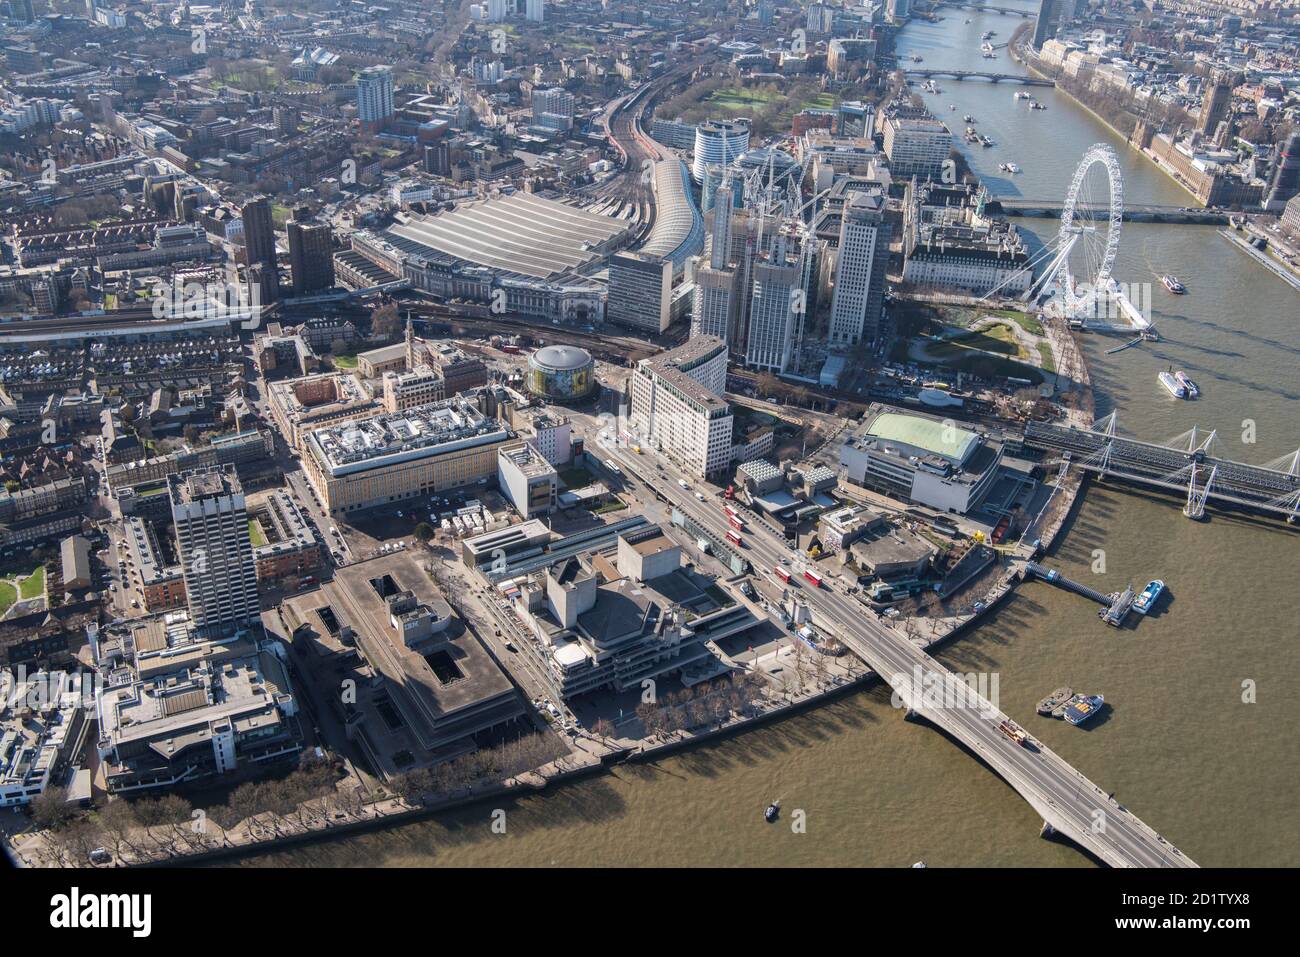 The South Bank, London, 2018, UK. Aerial view. Stock Photo